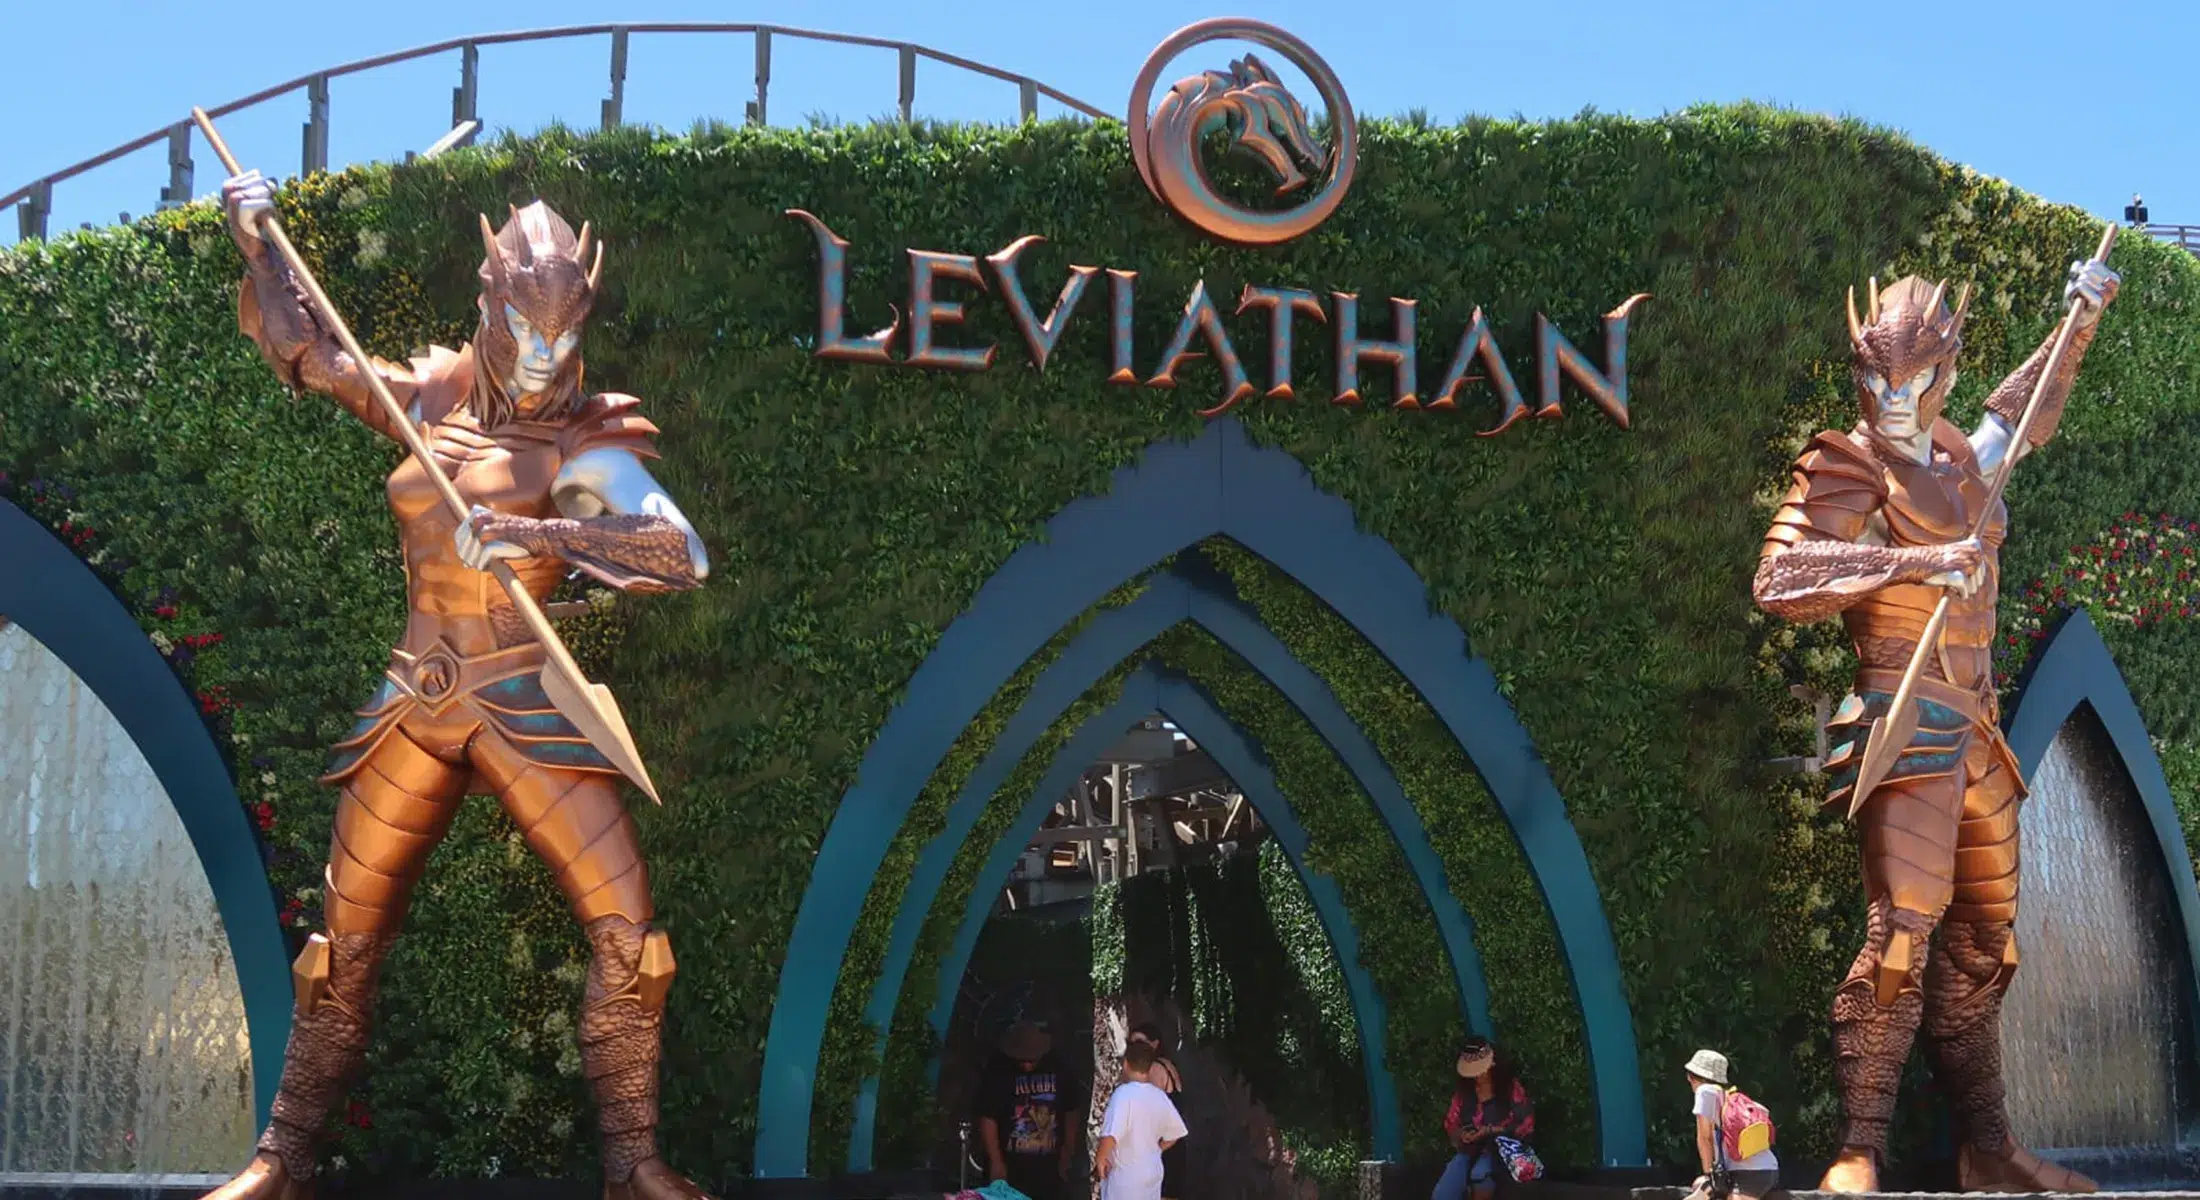 Golden armored statues guarding the entrance of Leviathan ride, designed by Sculpt Studios."